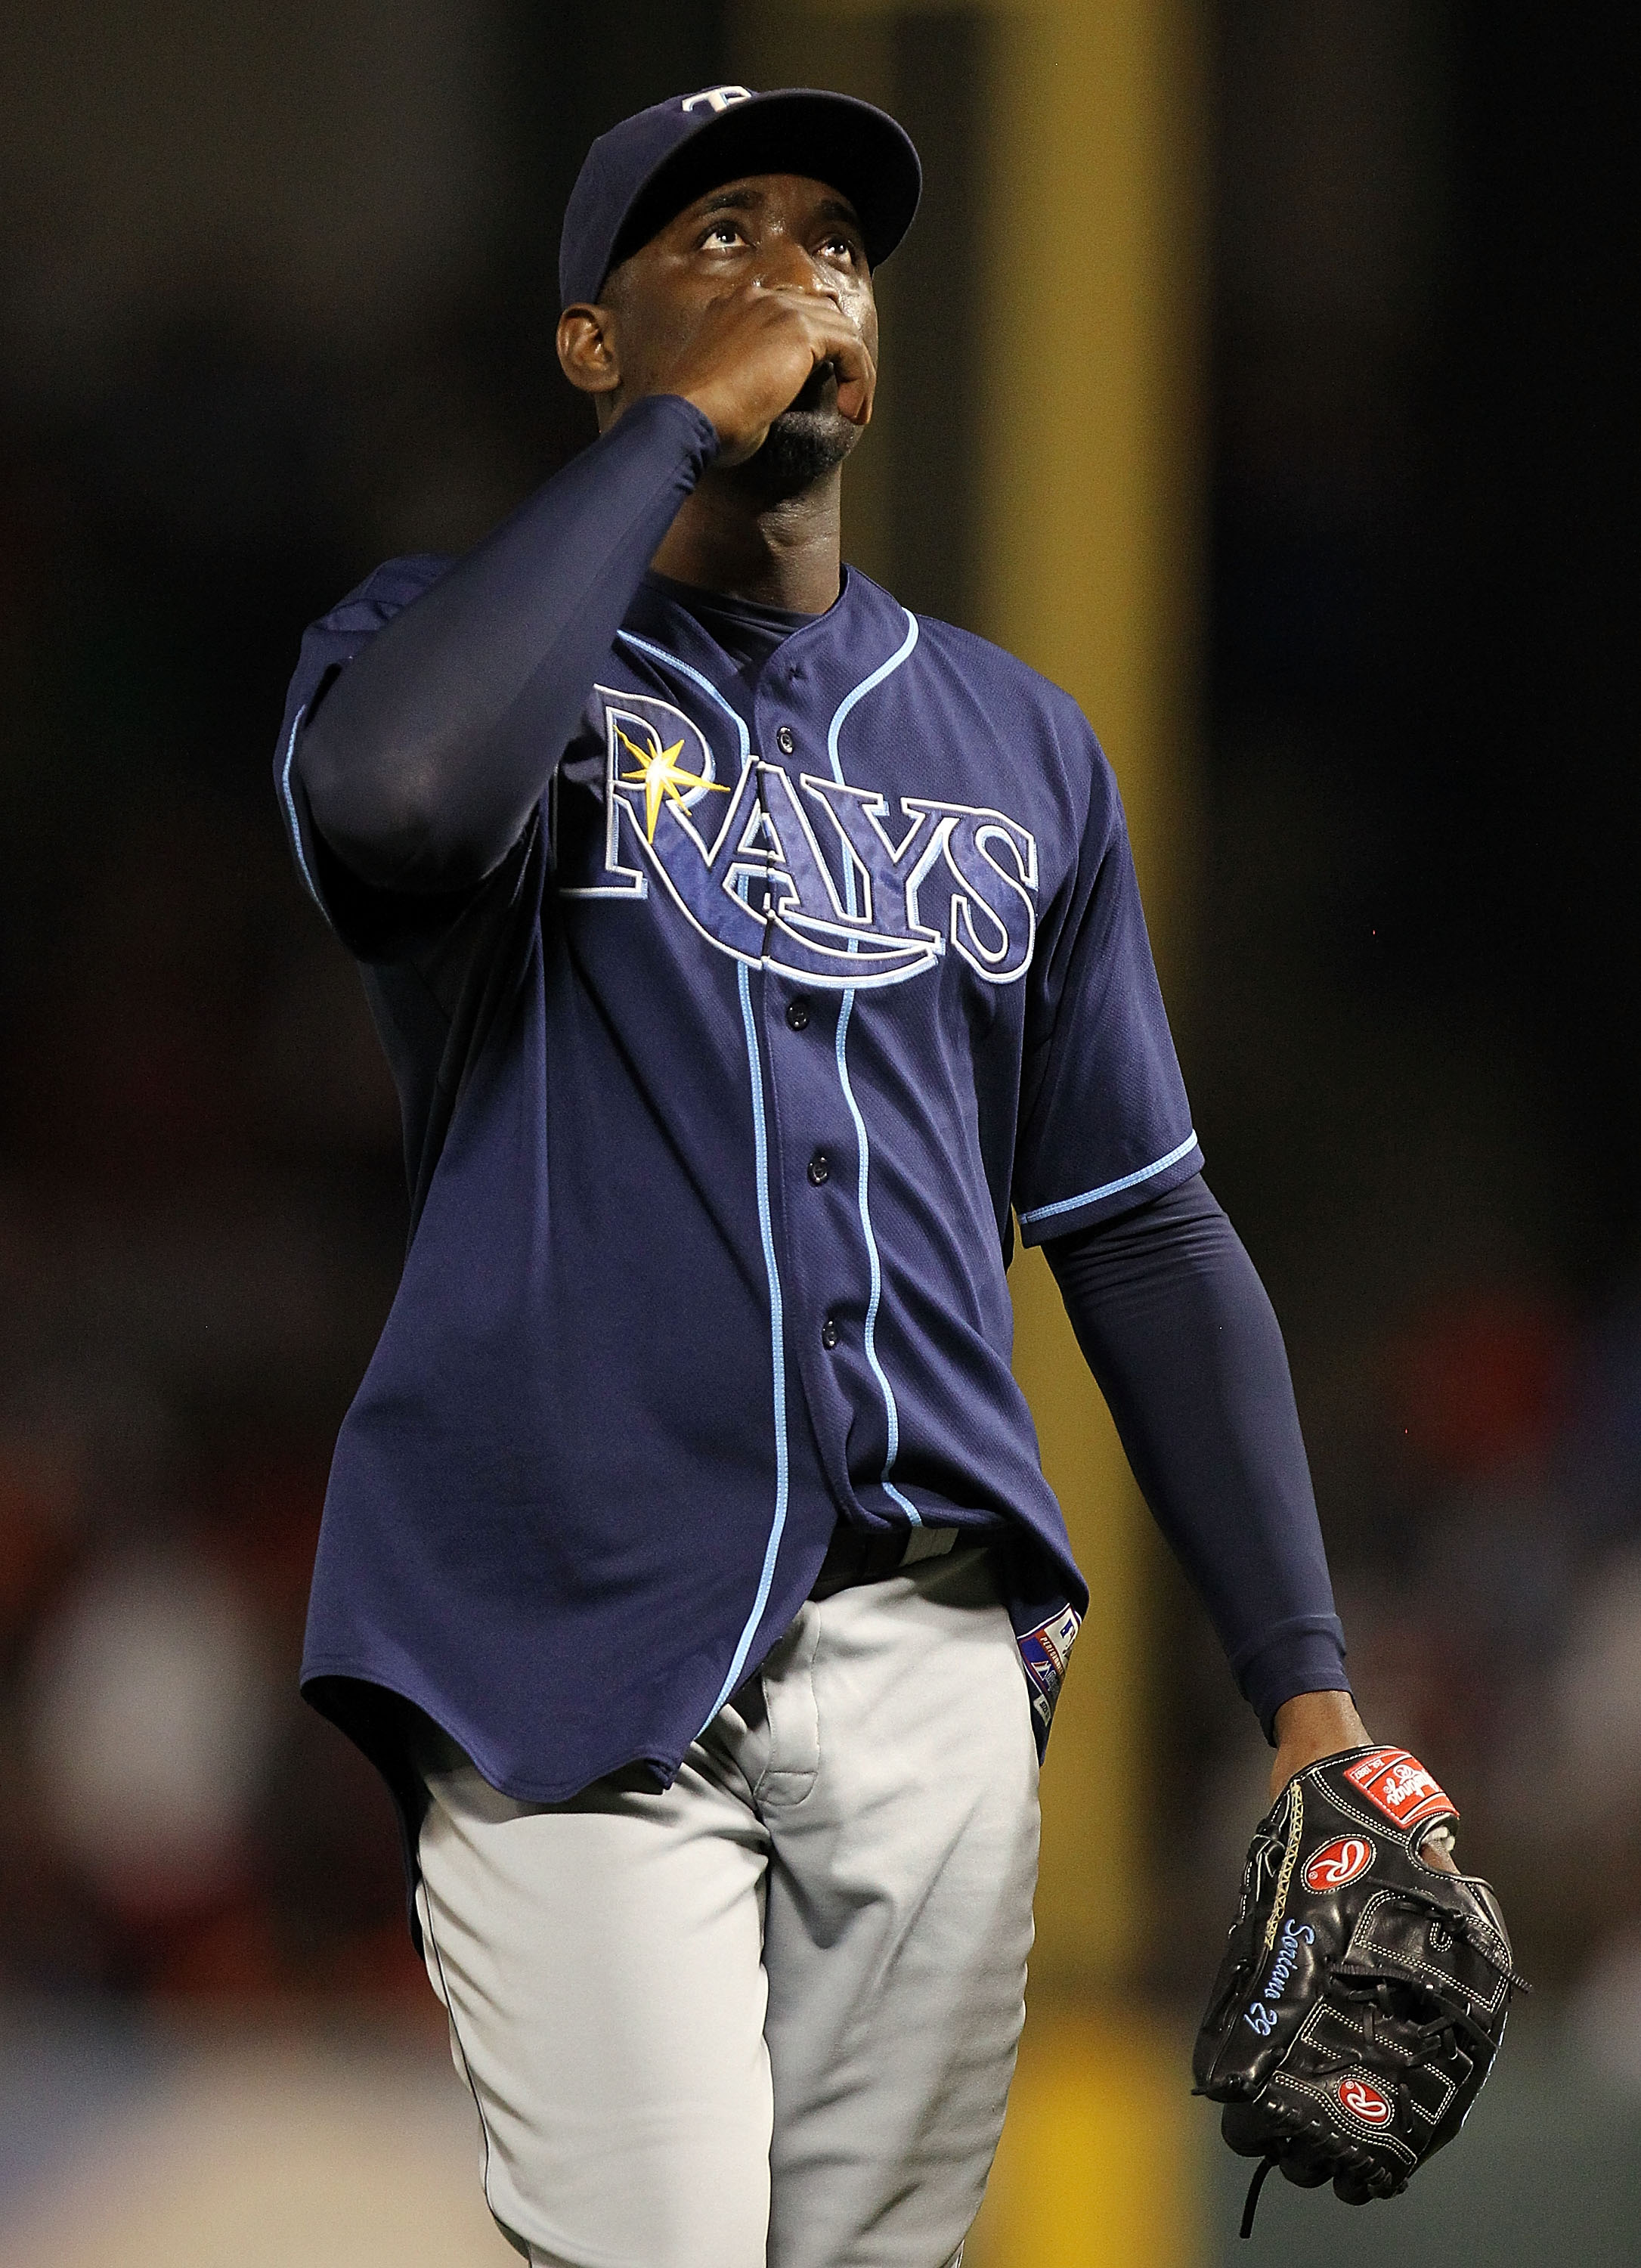 ARLINGTON, TX - OCTOBER 09:  Pitcher Rafael Soriano #29 of the Tampa Bay Rays reacts after a 6-3 win against the Texas Rangers during game 3 of the ALDS at Rangers Ballpark in Arlington on October 9, 2010 in Arlington, Texas.  (Photo by Ronald Martinez/Ge